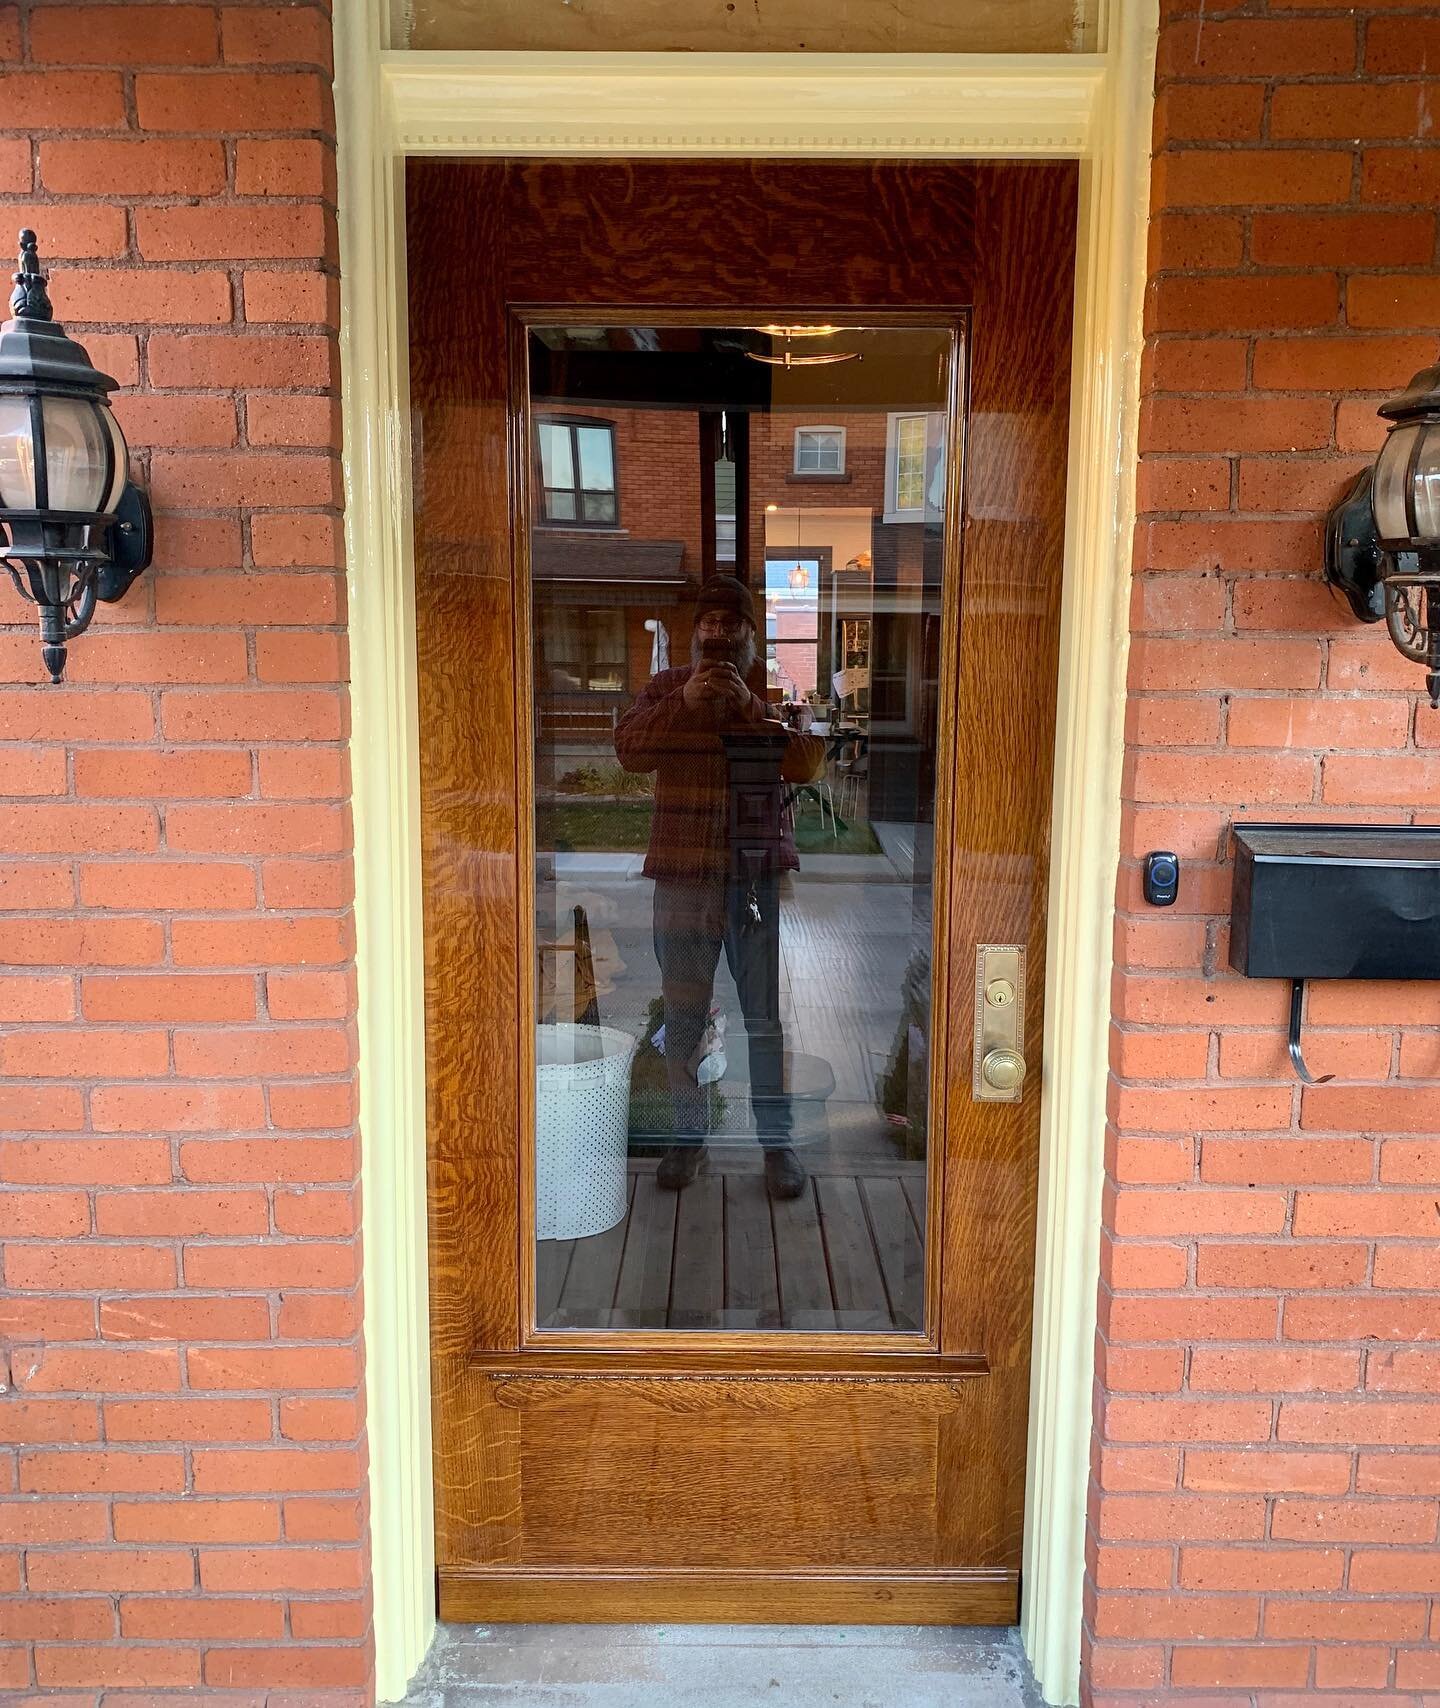 We started with restoring the entry door and jamb, bringing them back to life. The door received a glow up and was finished with Le Tonkinois marine varnish. The jamb had the aluminum capping removed, some repairs, and was painted with @finepaintsofe